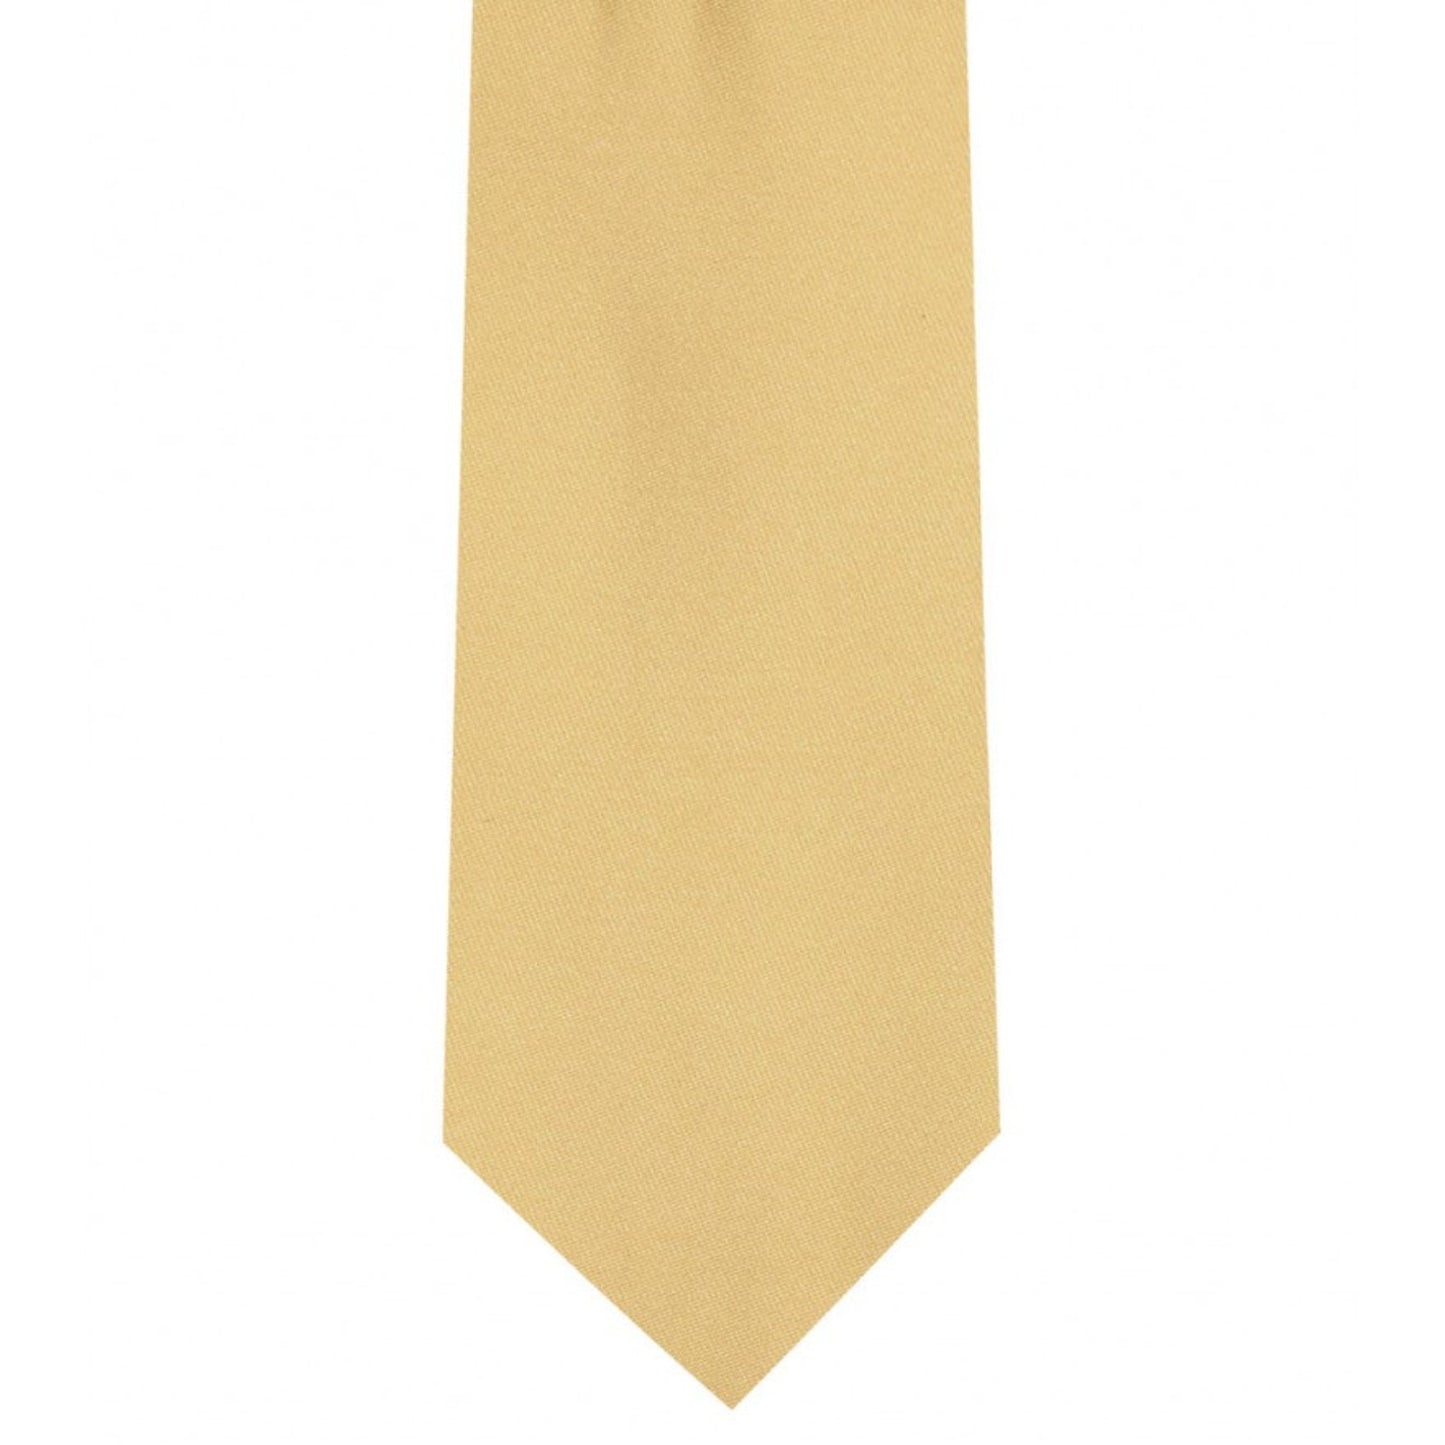 Classic Gold Tie Ultra Skinny tie width 2.25 inches With Matching Pocket Square | KCT Menswear